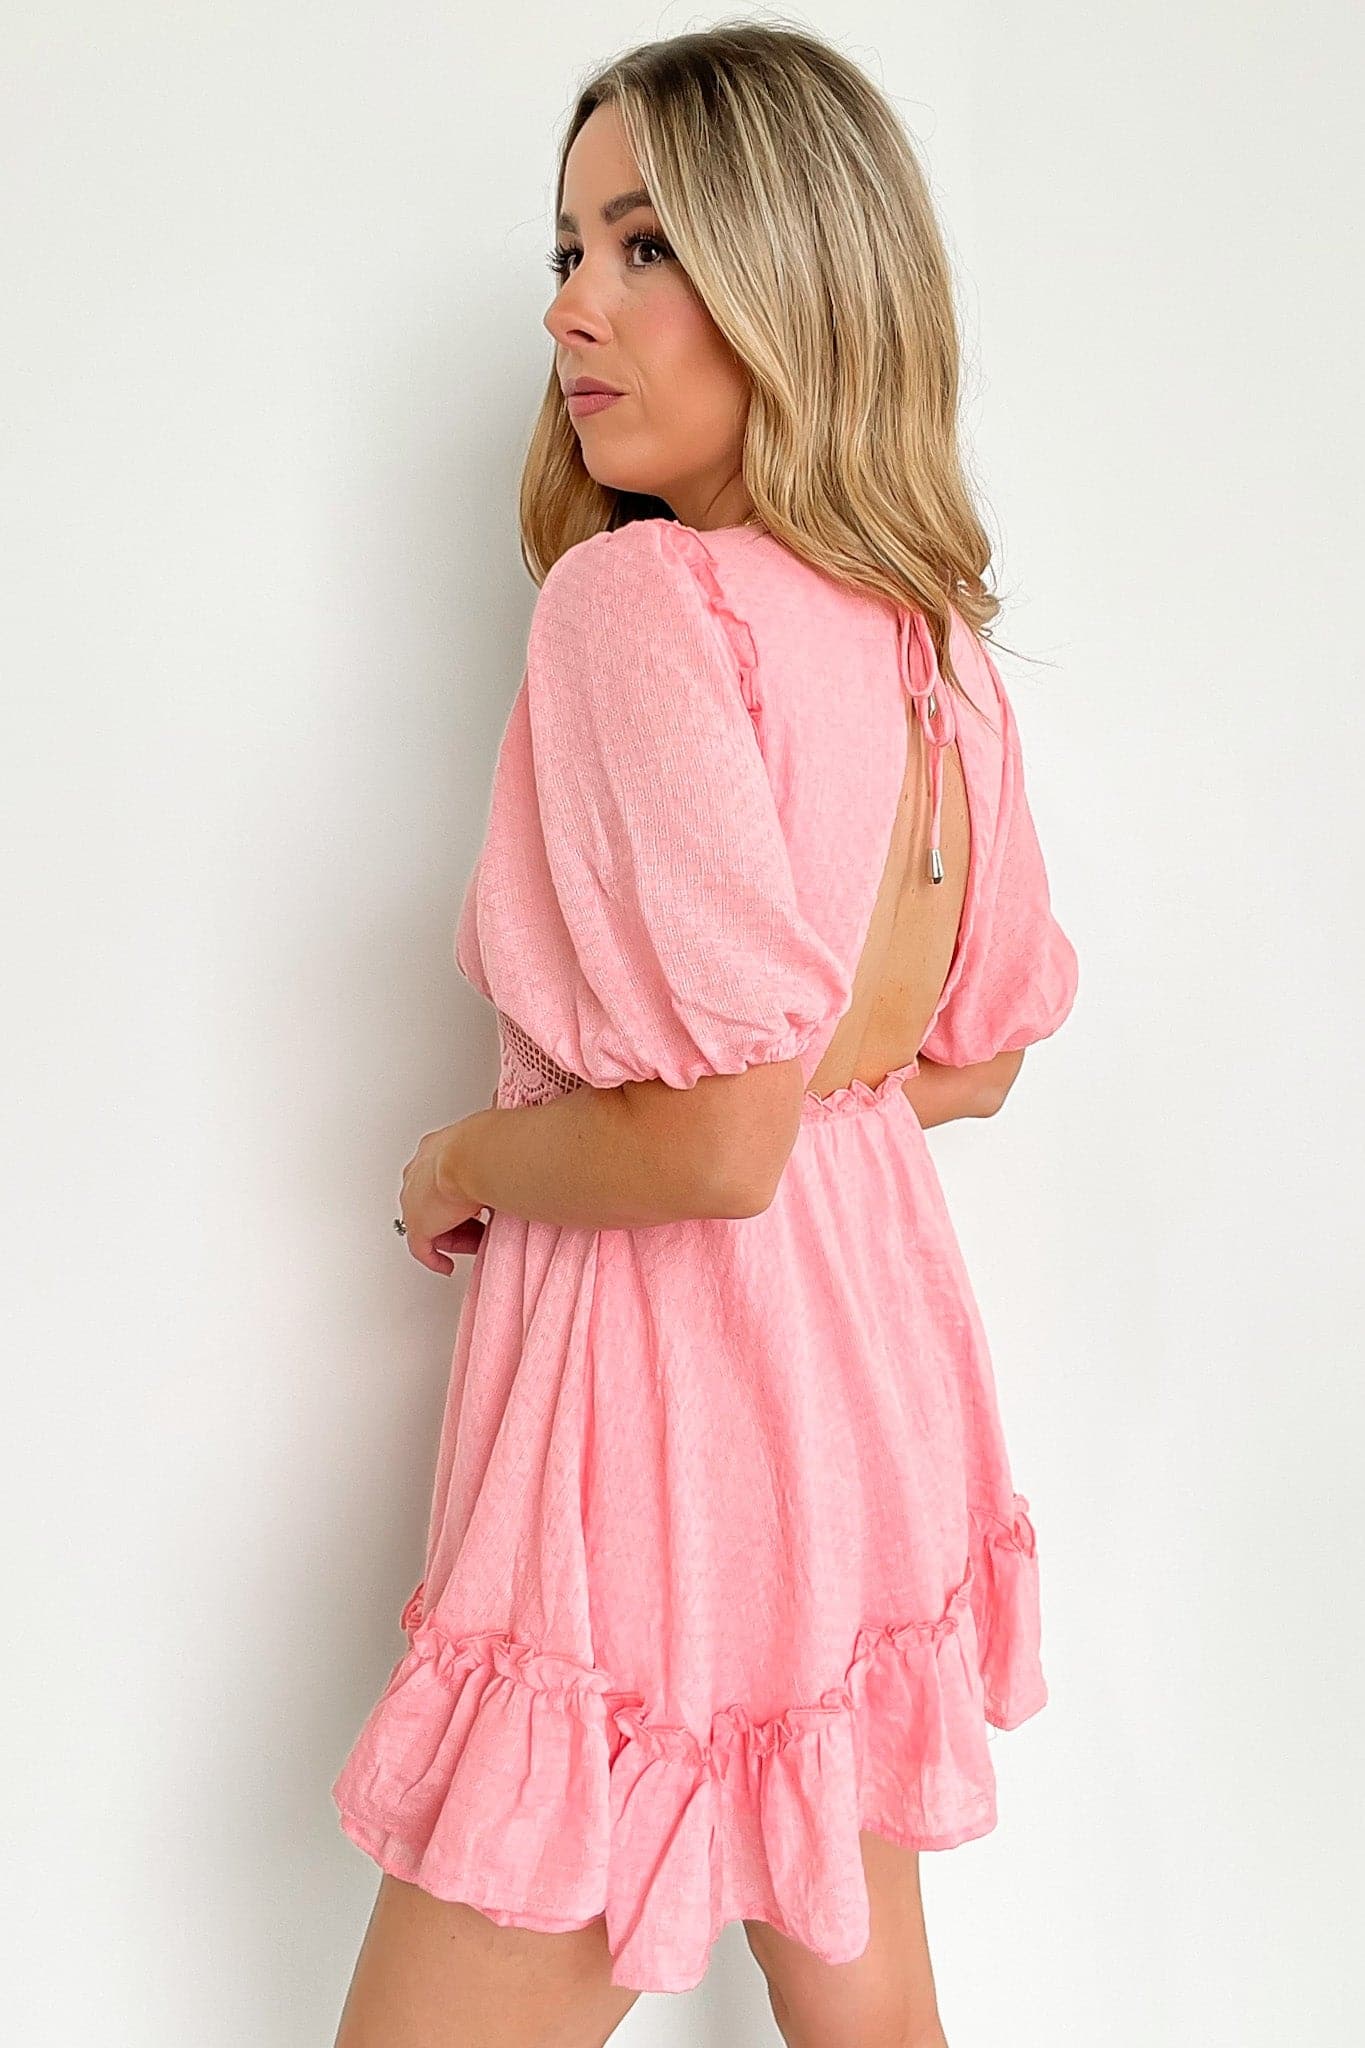  Every Last Detail V-Neck Lace Dress - FINAL SALE - Madison and Mallory